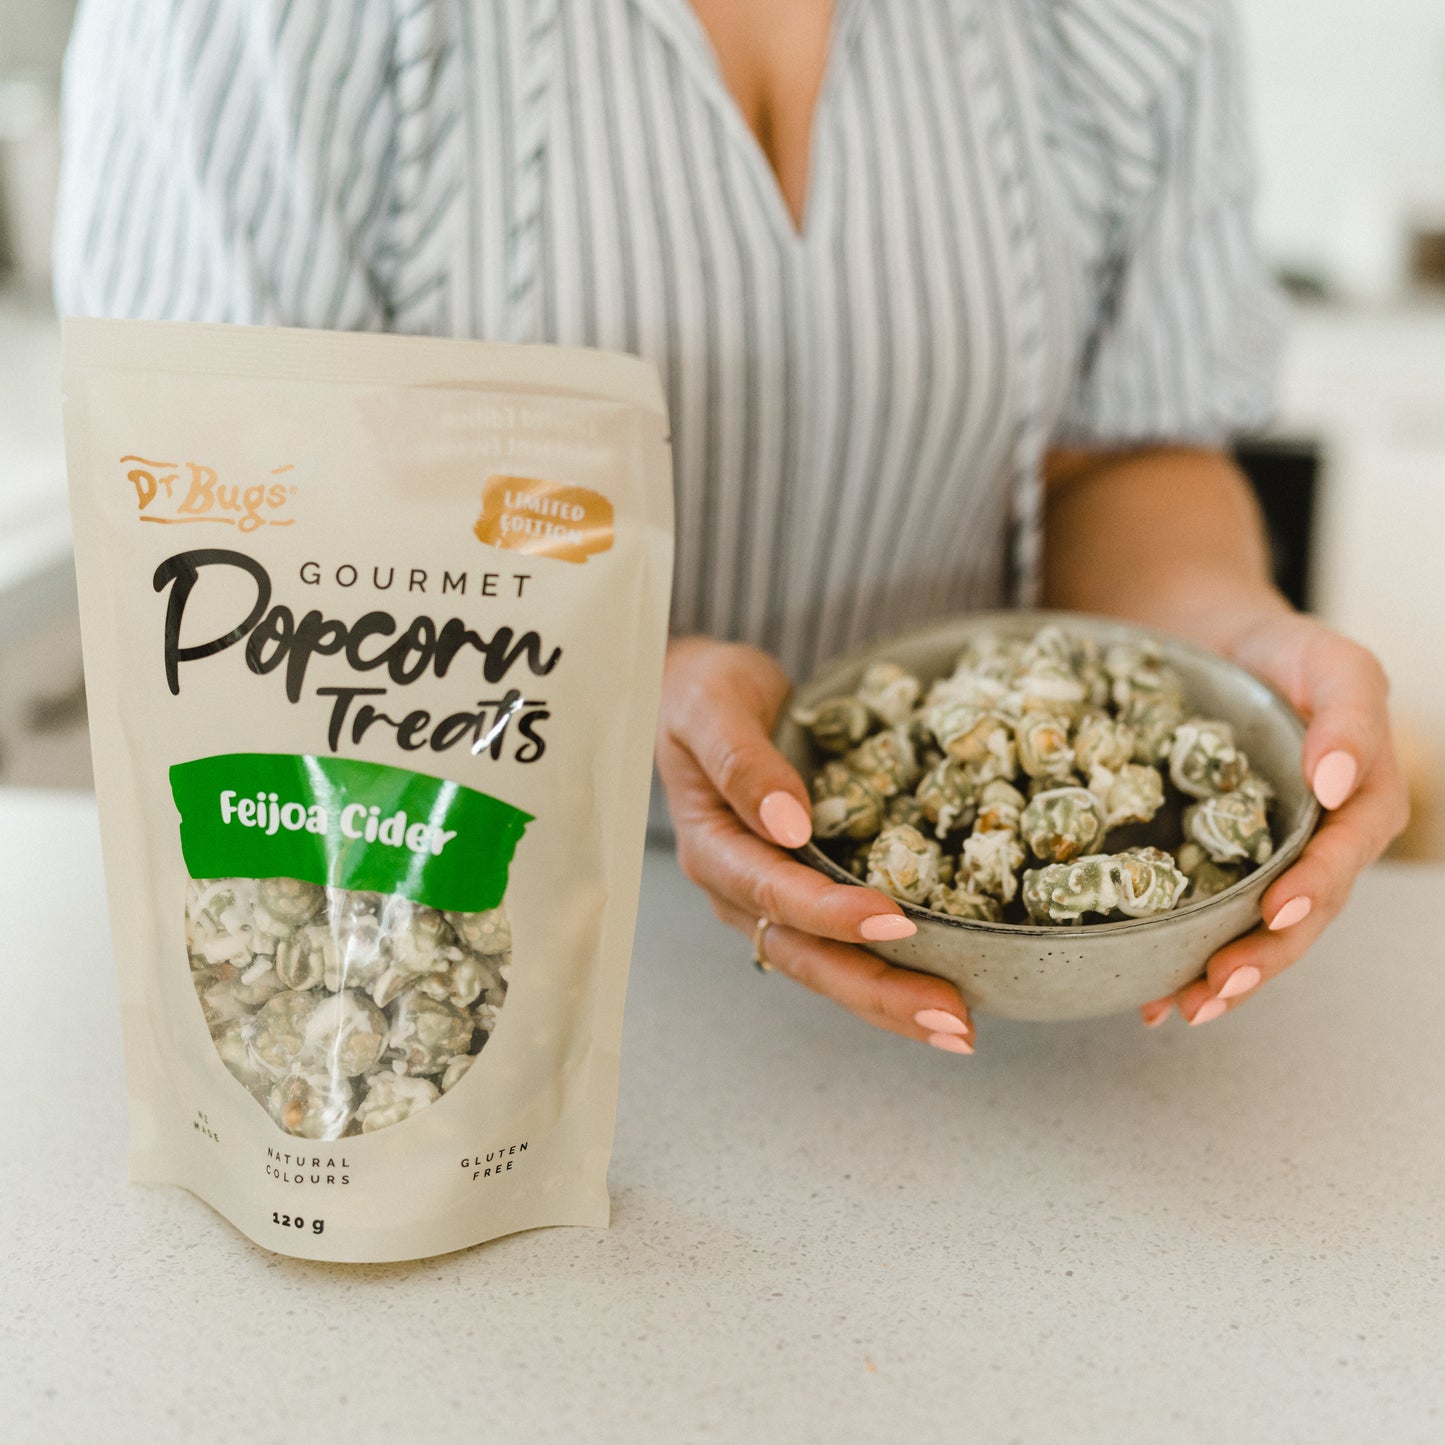 Dr Bugs Limited Edition Feijoa Cider Popcorn